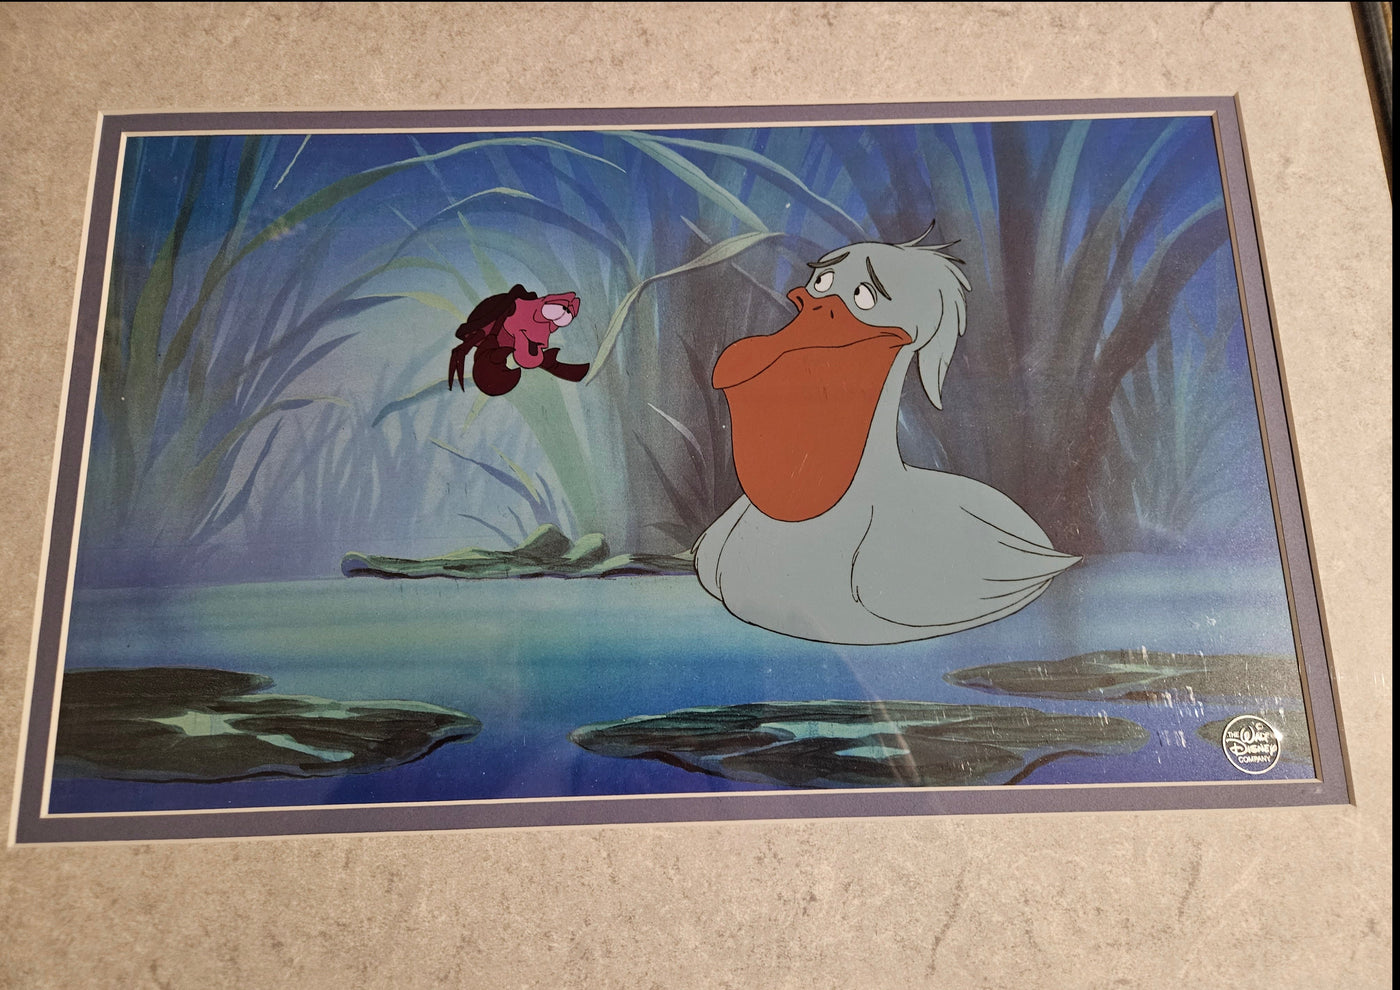 Original Walt Disney Production Cel from The Little Mermaid featuring Sebastian and a pelican